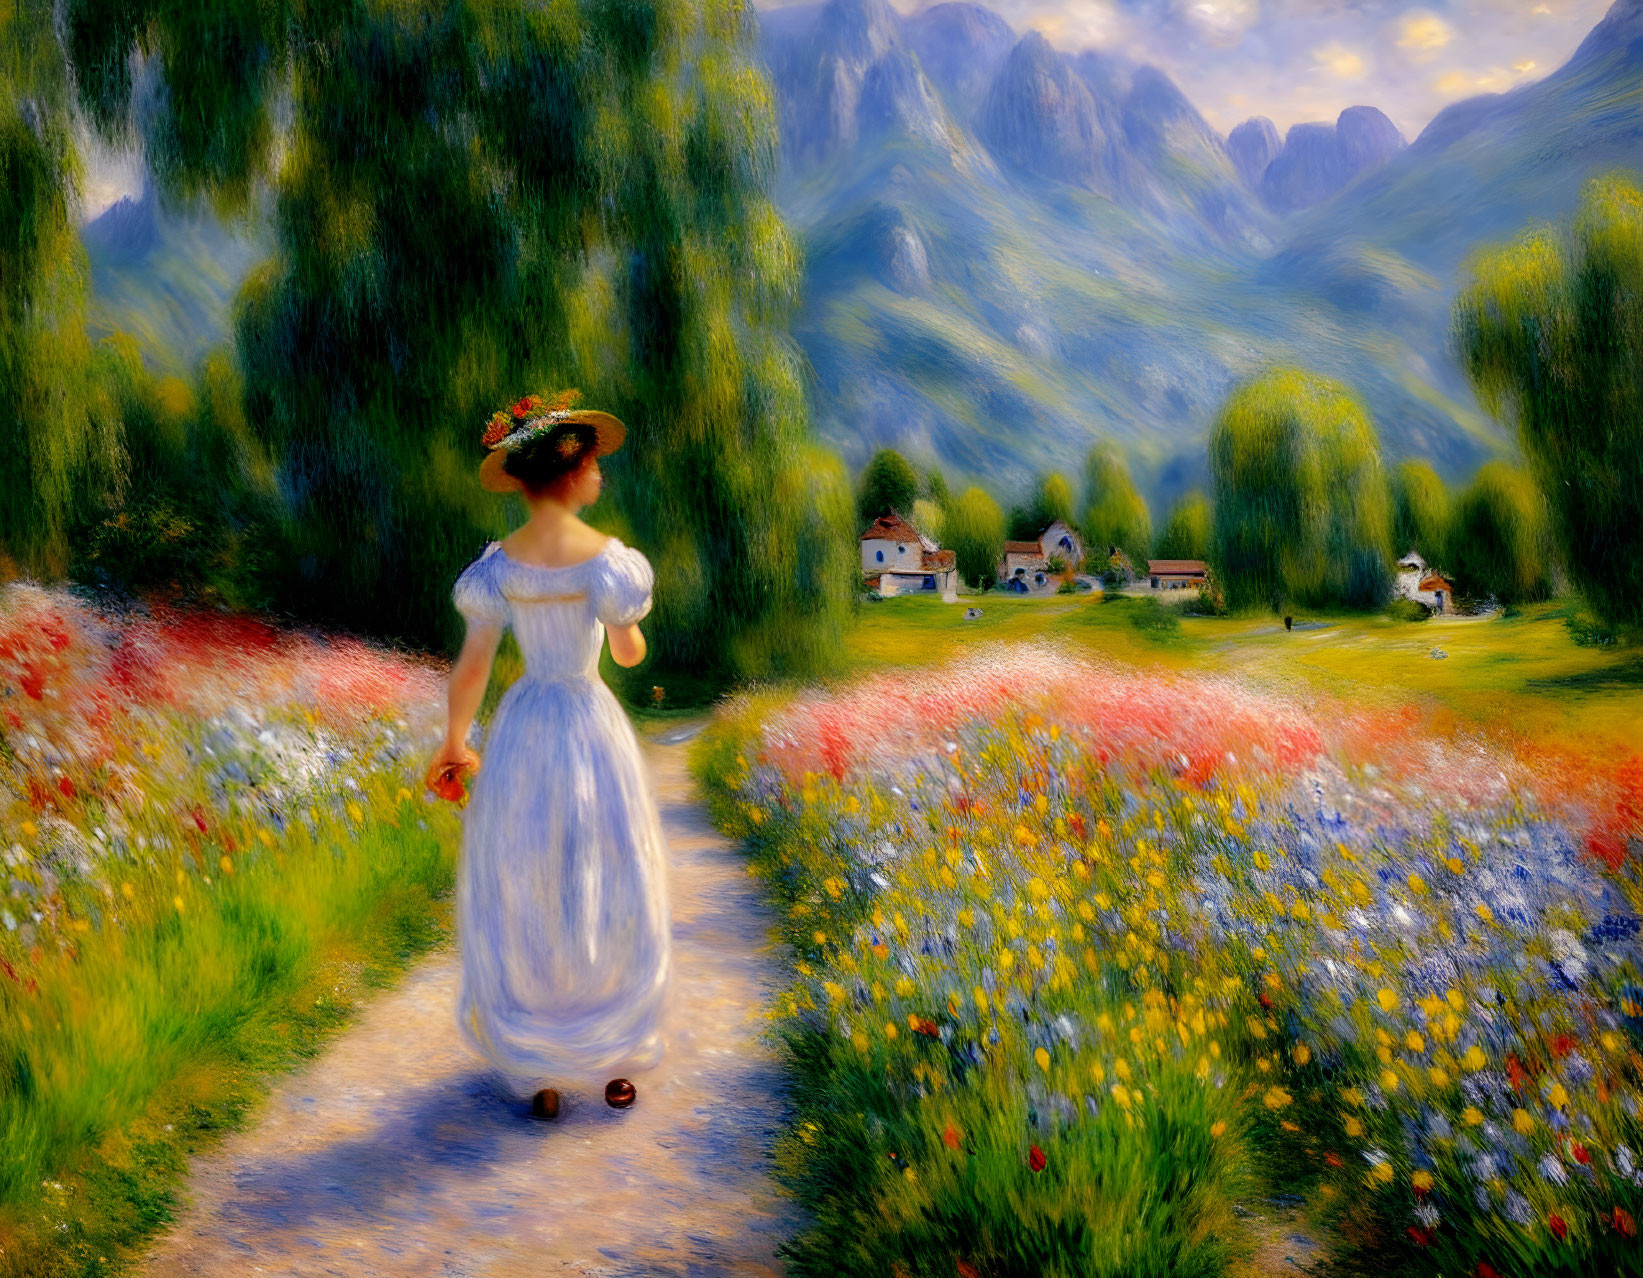 Woman in white dress strolling on flower-lined path to village with mountain backdrop